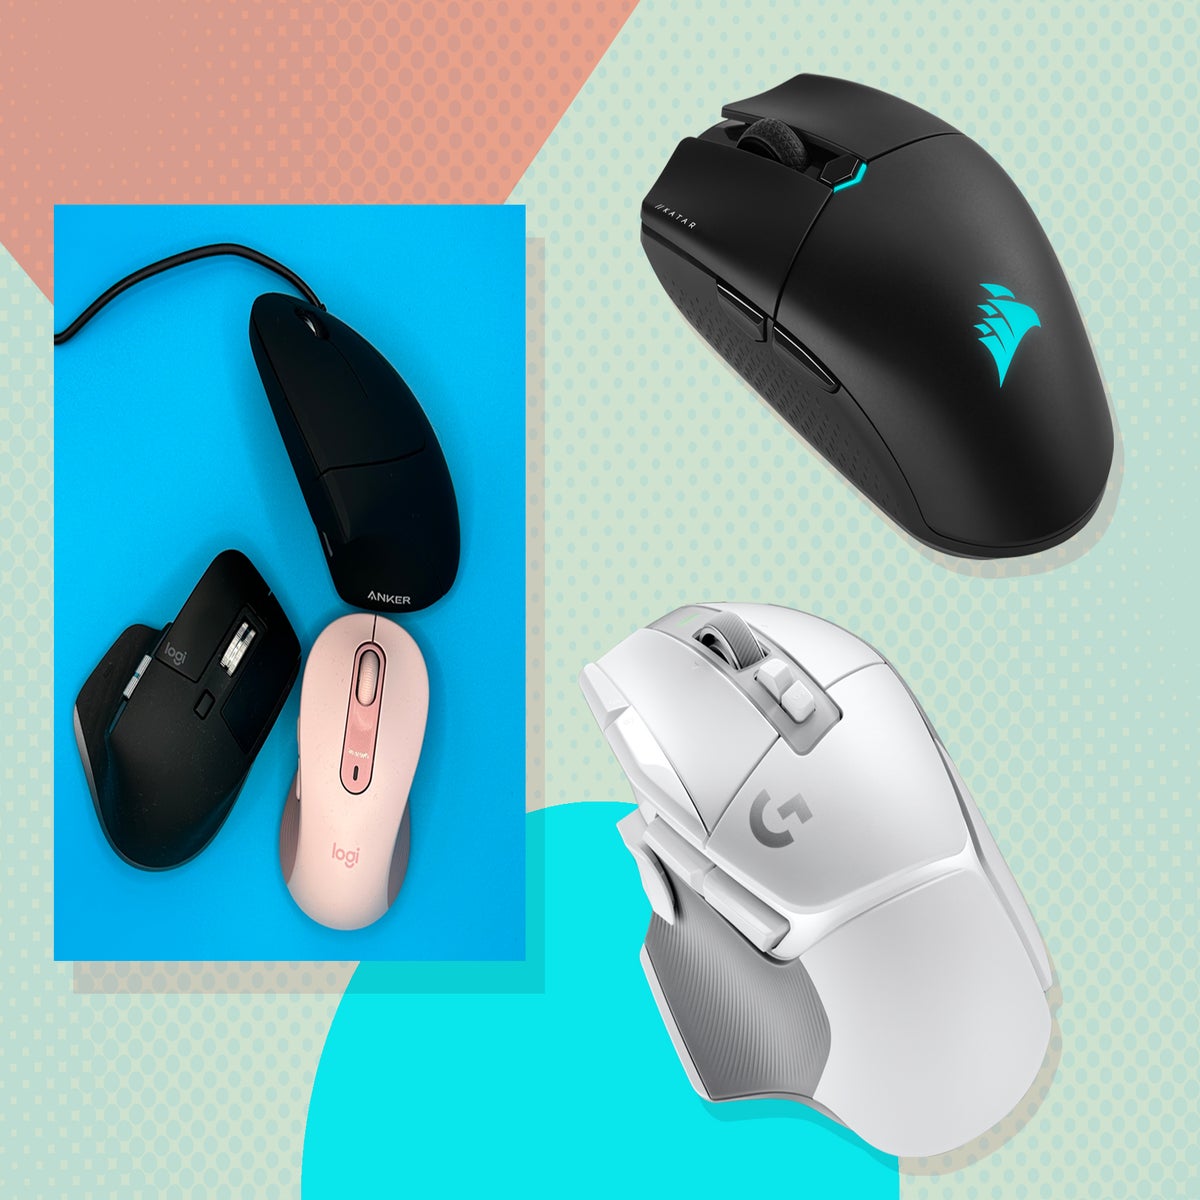 Logitech for Creators: We Make The Tools. You Change The World